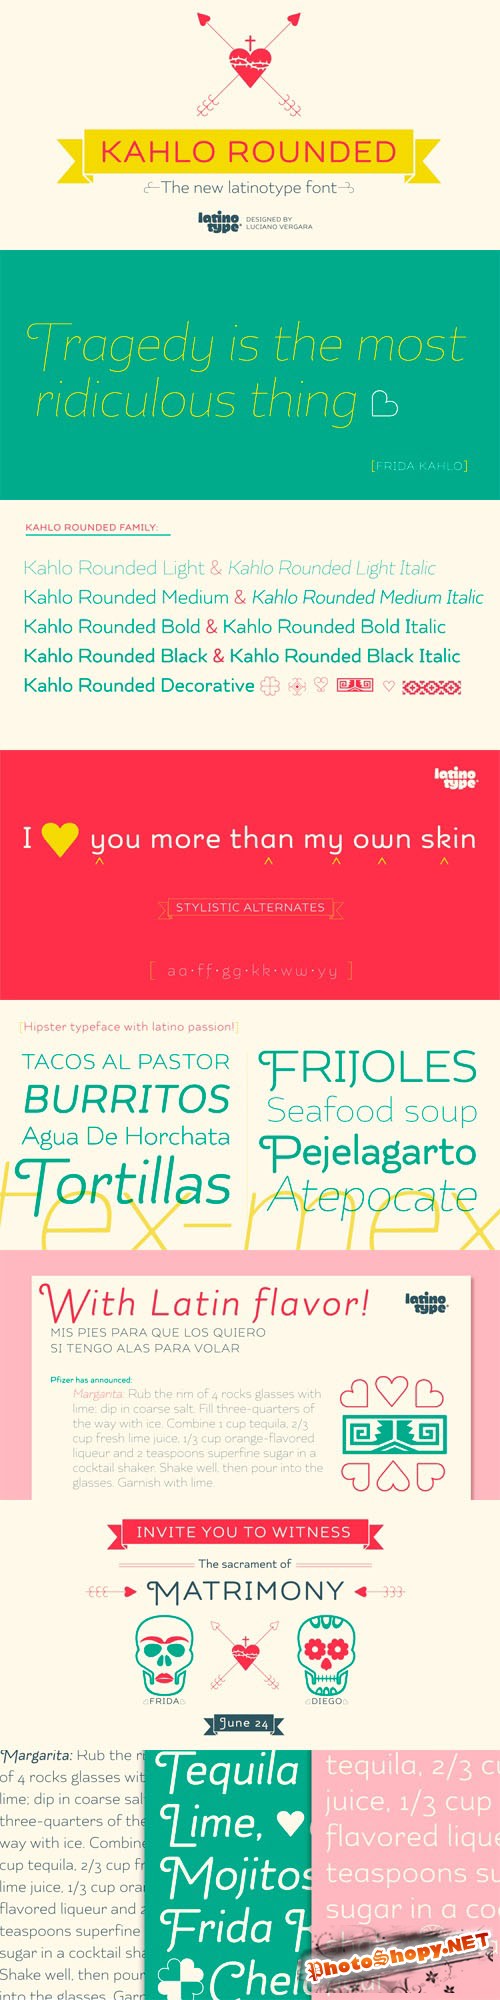 Kahlo Rounded Font Family